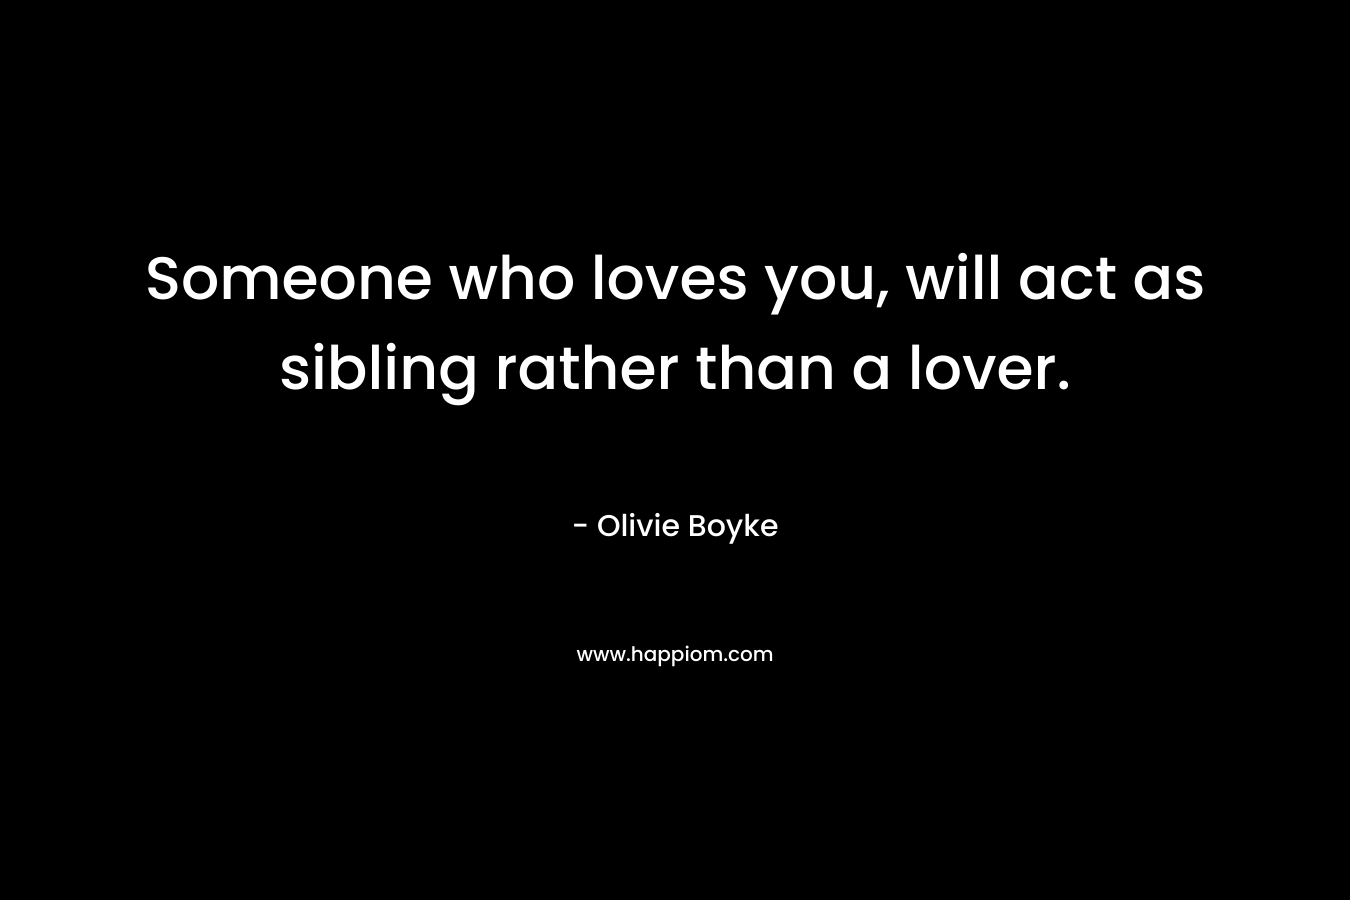 Someone who loves you, will act as sibling rather than a lover.